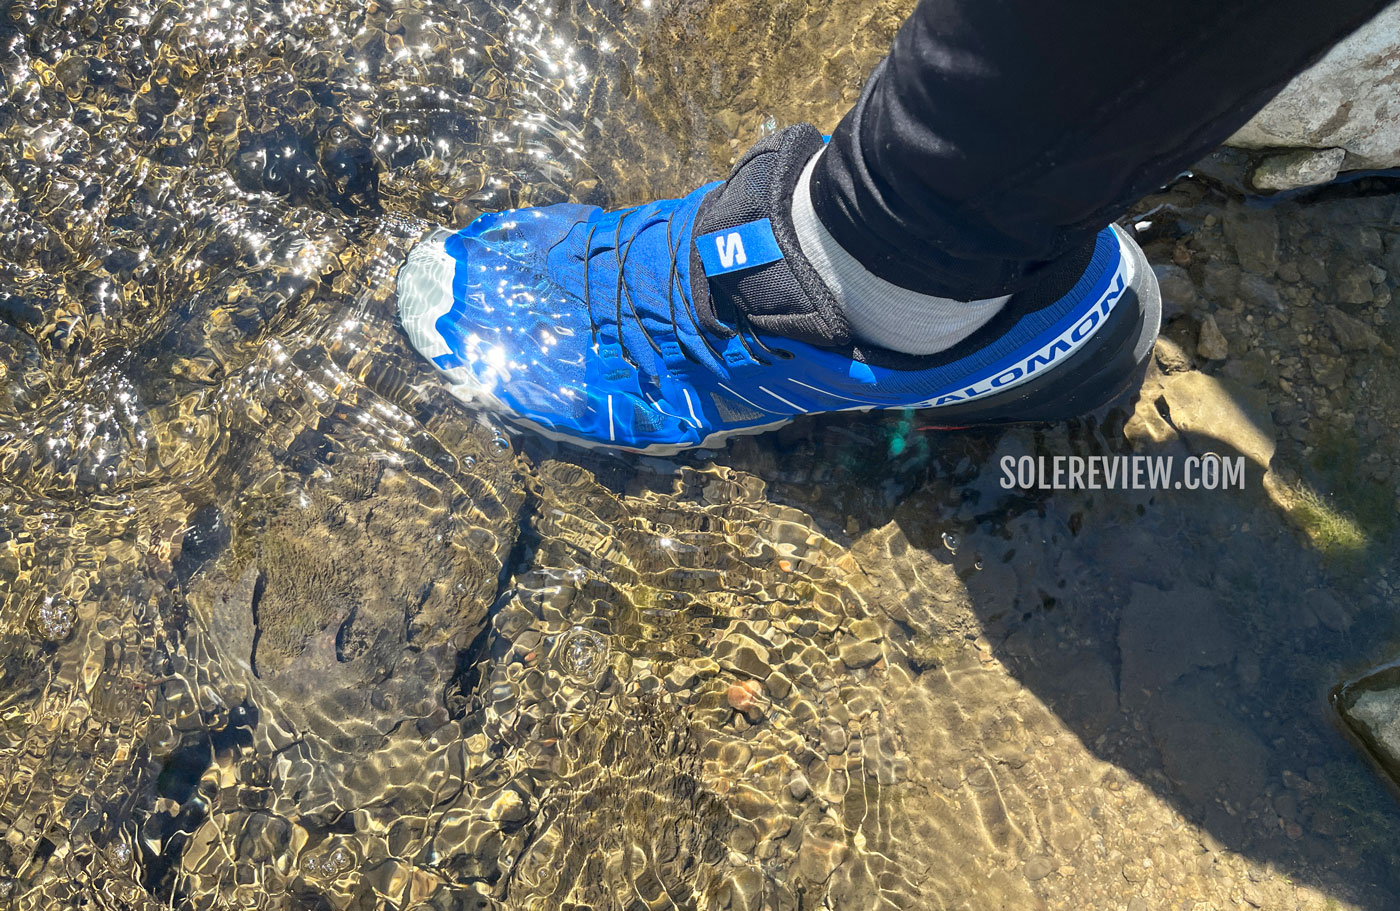 The best waterproof trail running shoes